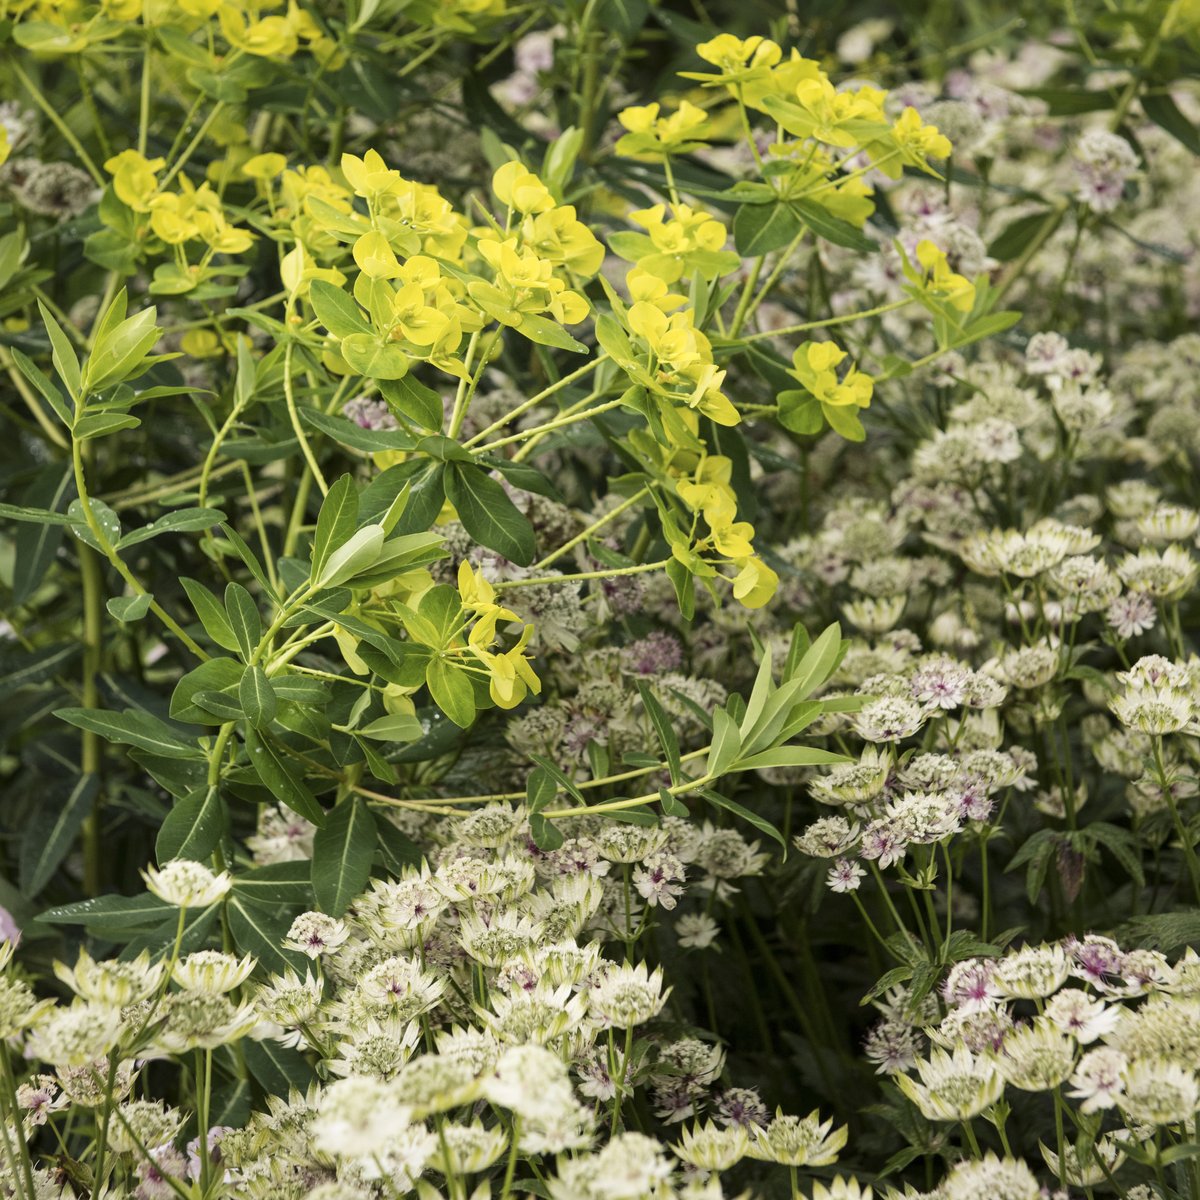 This wonderful summer pairing of euphorbia and astrantia will provide low maintenance colour throughout the season. Similar in size and form, it’s the contrast in colour and texture that set these two apart, making the combination both dynamic and fresh. #MyCrocus